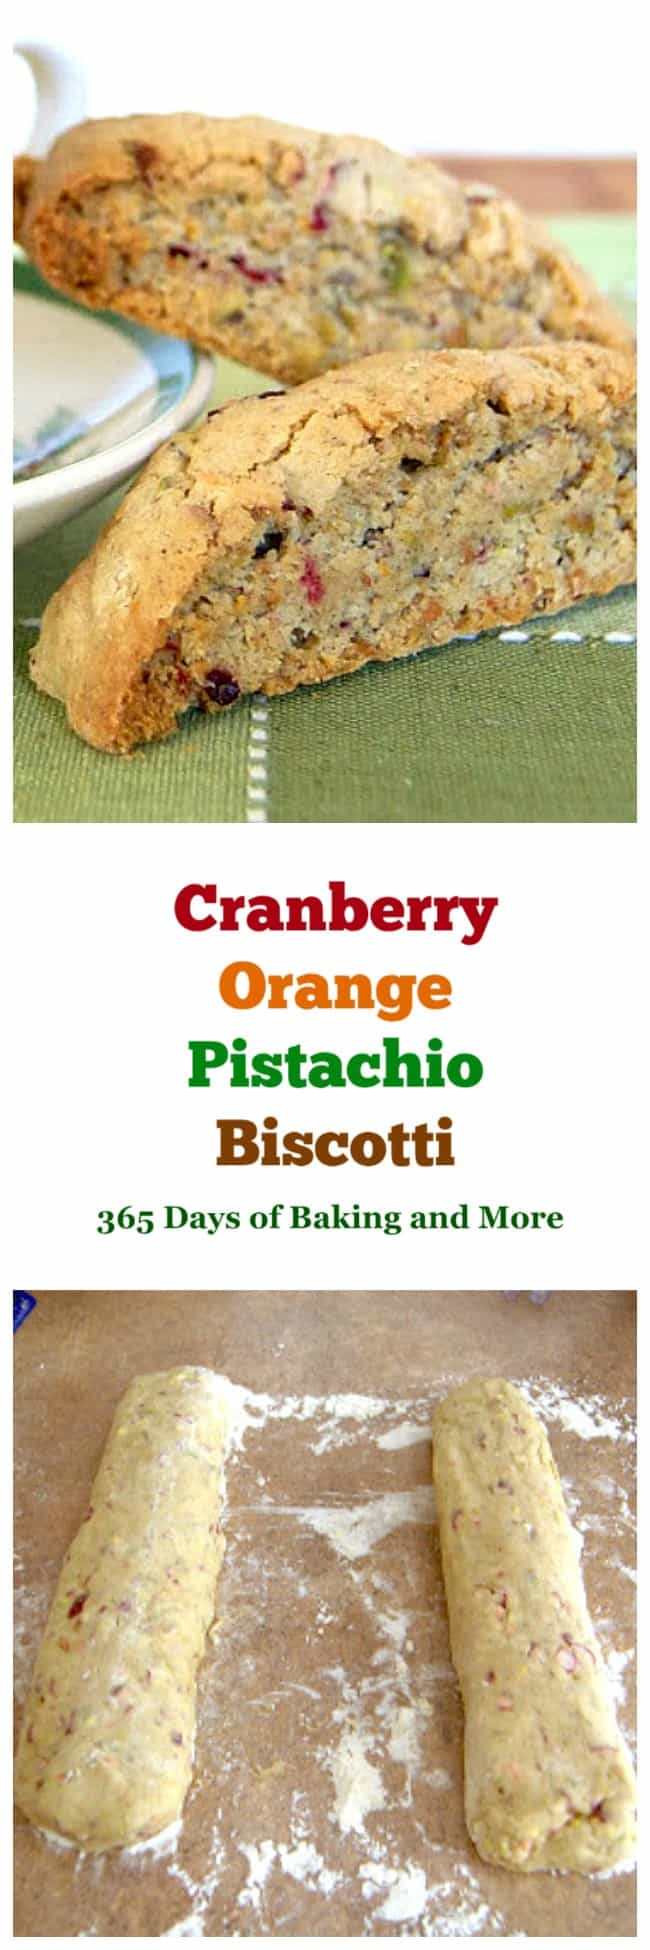 This Cranberry Orange Pistachio Biscotti is an Italian biscuit cookie with the flavors of the holiday season. They will be delicious dunked in a cup of tea or eaten with your morning coffee. 